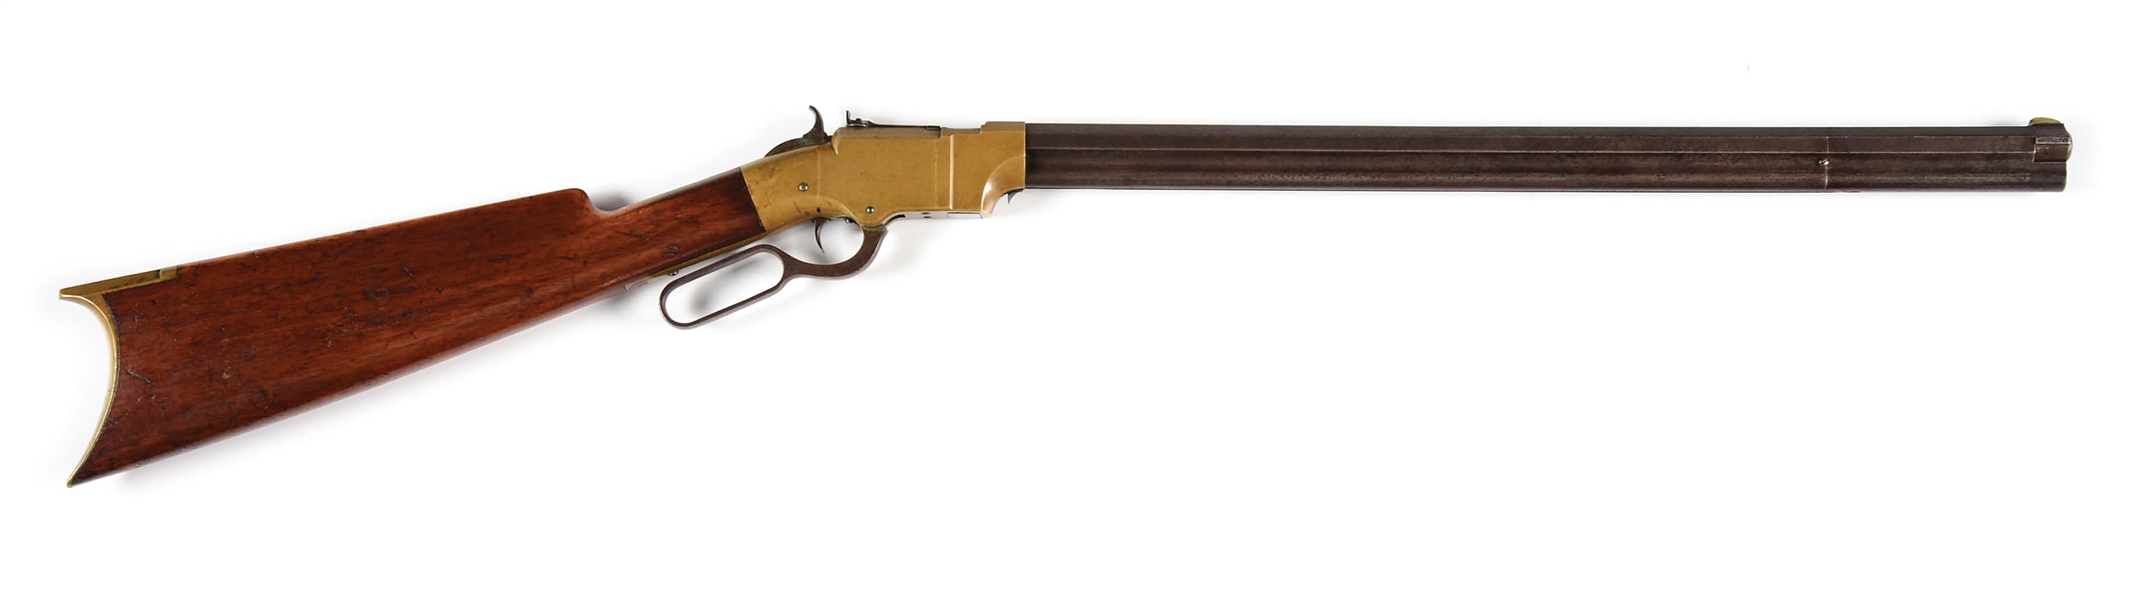 (A) NEW HAVEN ARMS COMPANY VOLCANIC CARBINE SERIAL NUMBER 200.